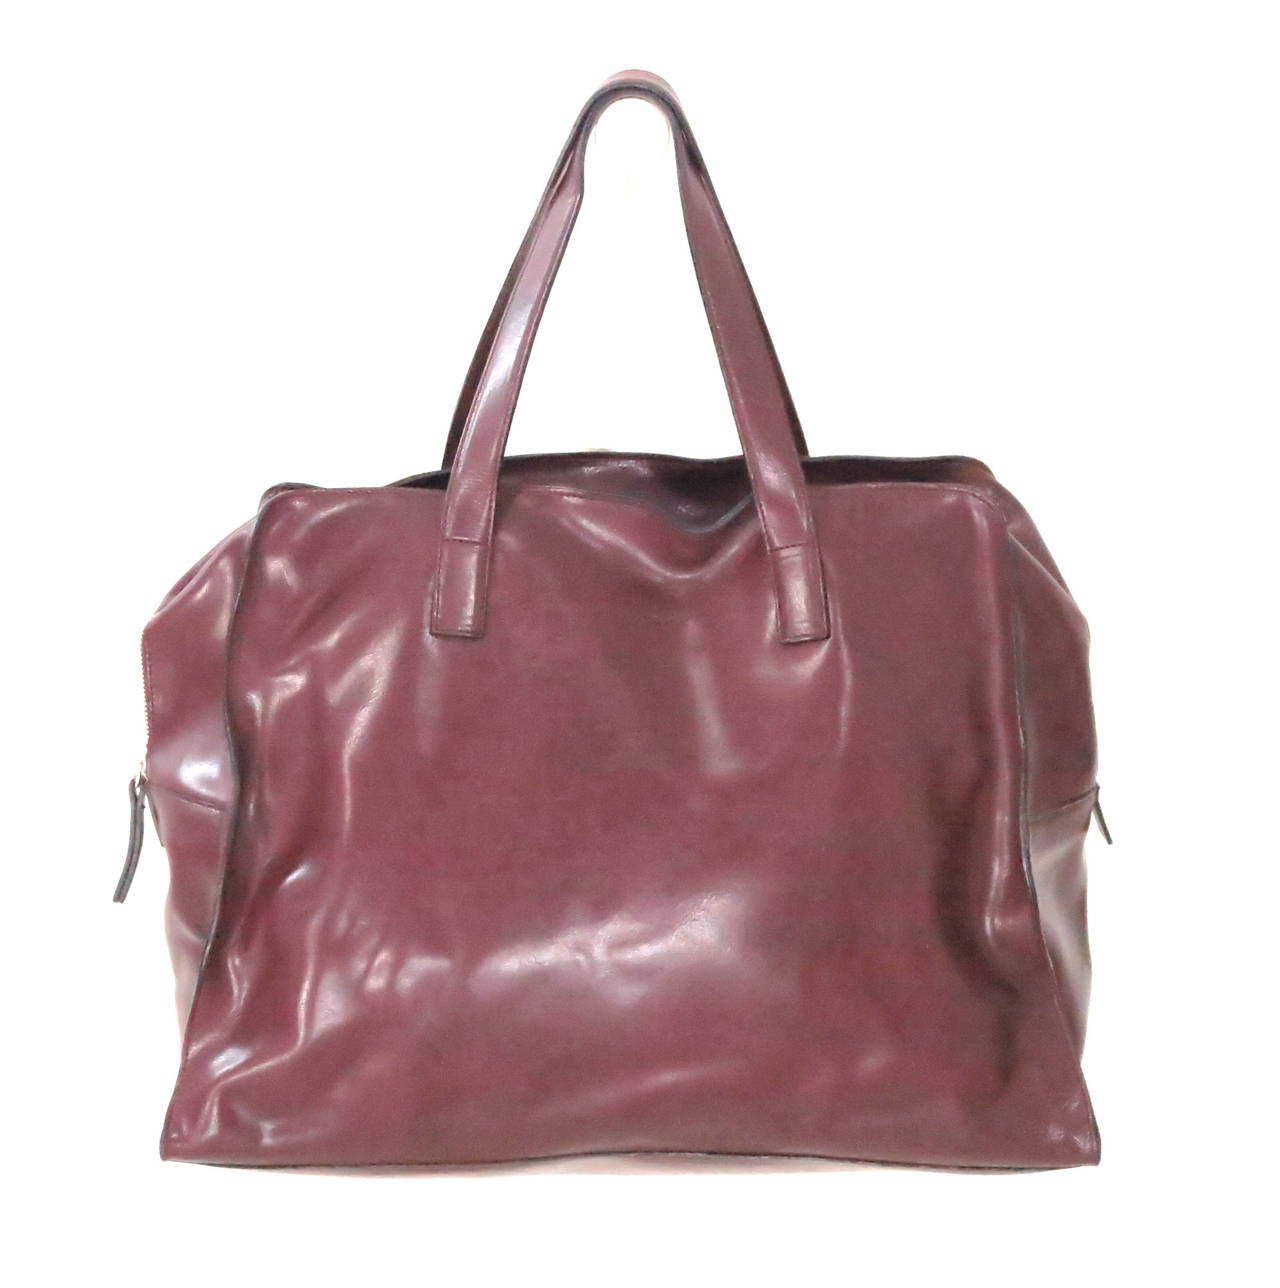 Gorgeous deep burgundy leather double handle tote bag/handbag, from Gabriele Strehle for Strenesse...Large roomy tote has a zipper top, large open compartment inside and open compartments on either side (inside)...The bag is unlined and looks like